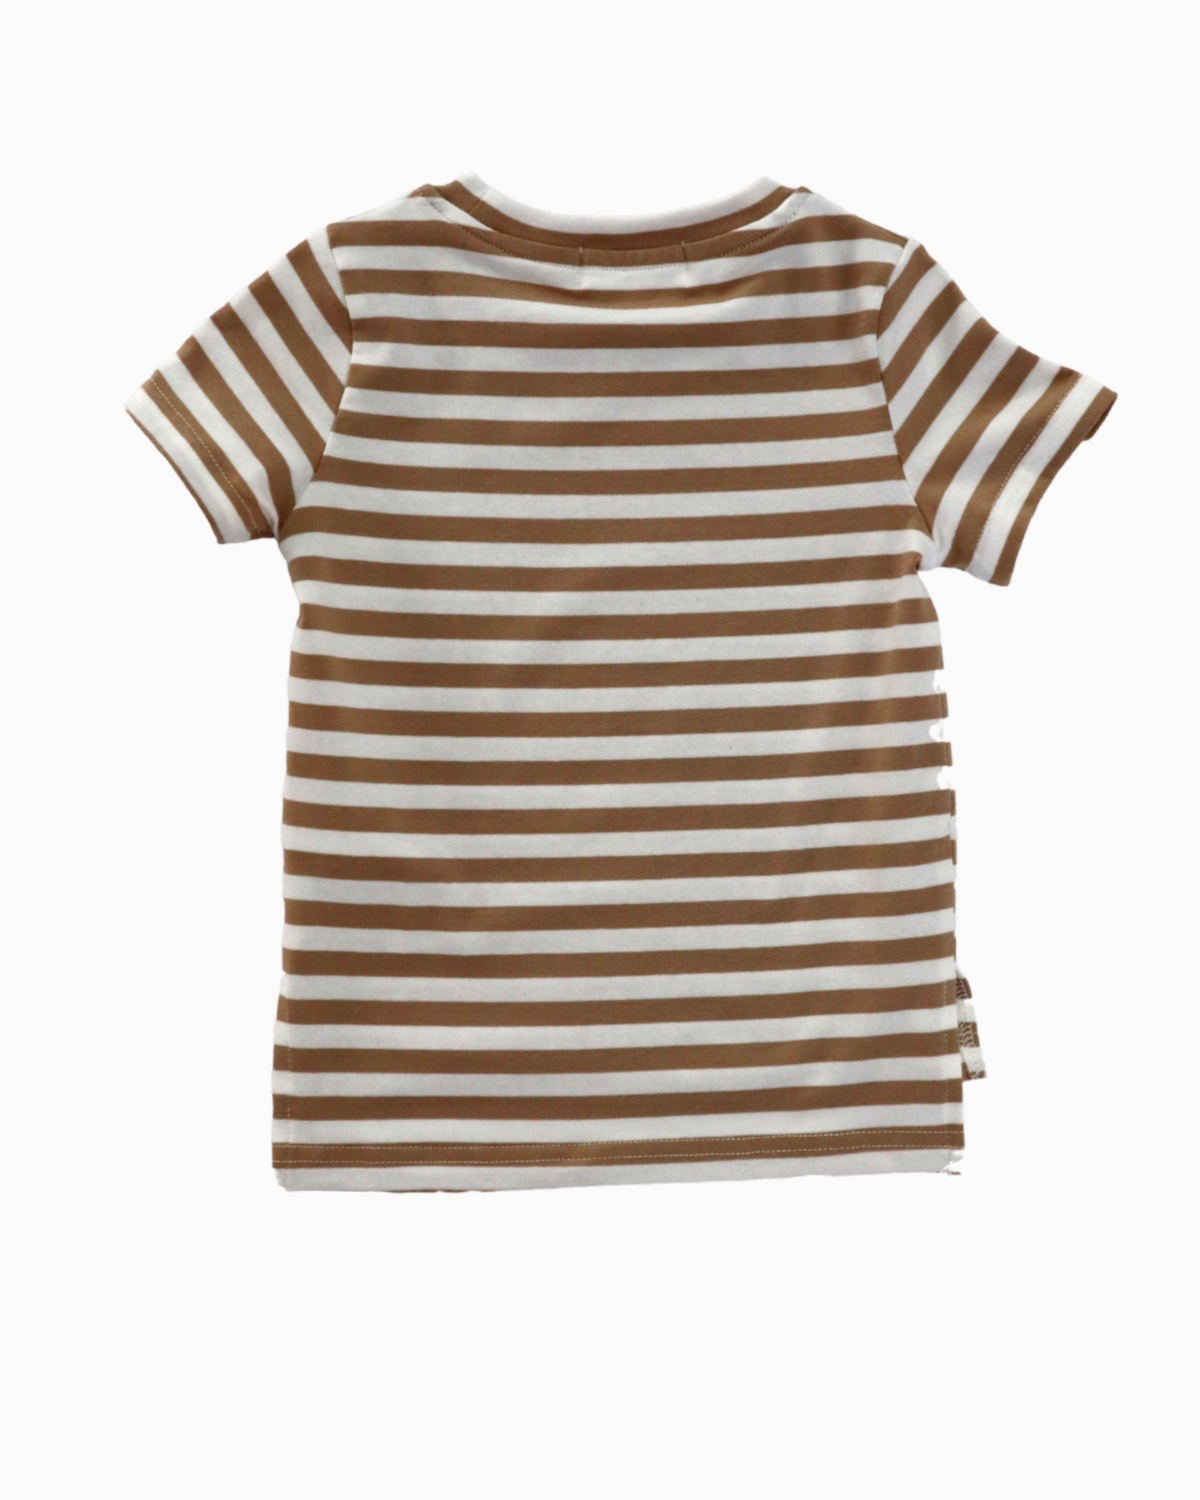 Buddy Tall Tee in Ivory and Almond Stripe